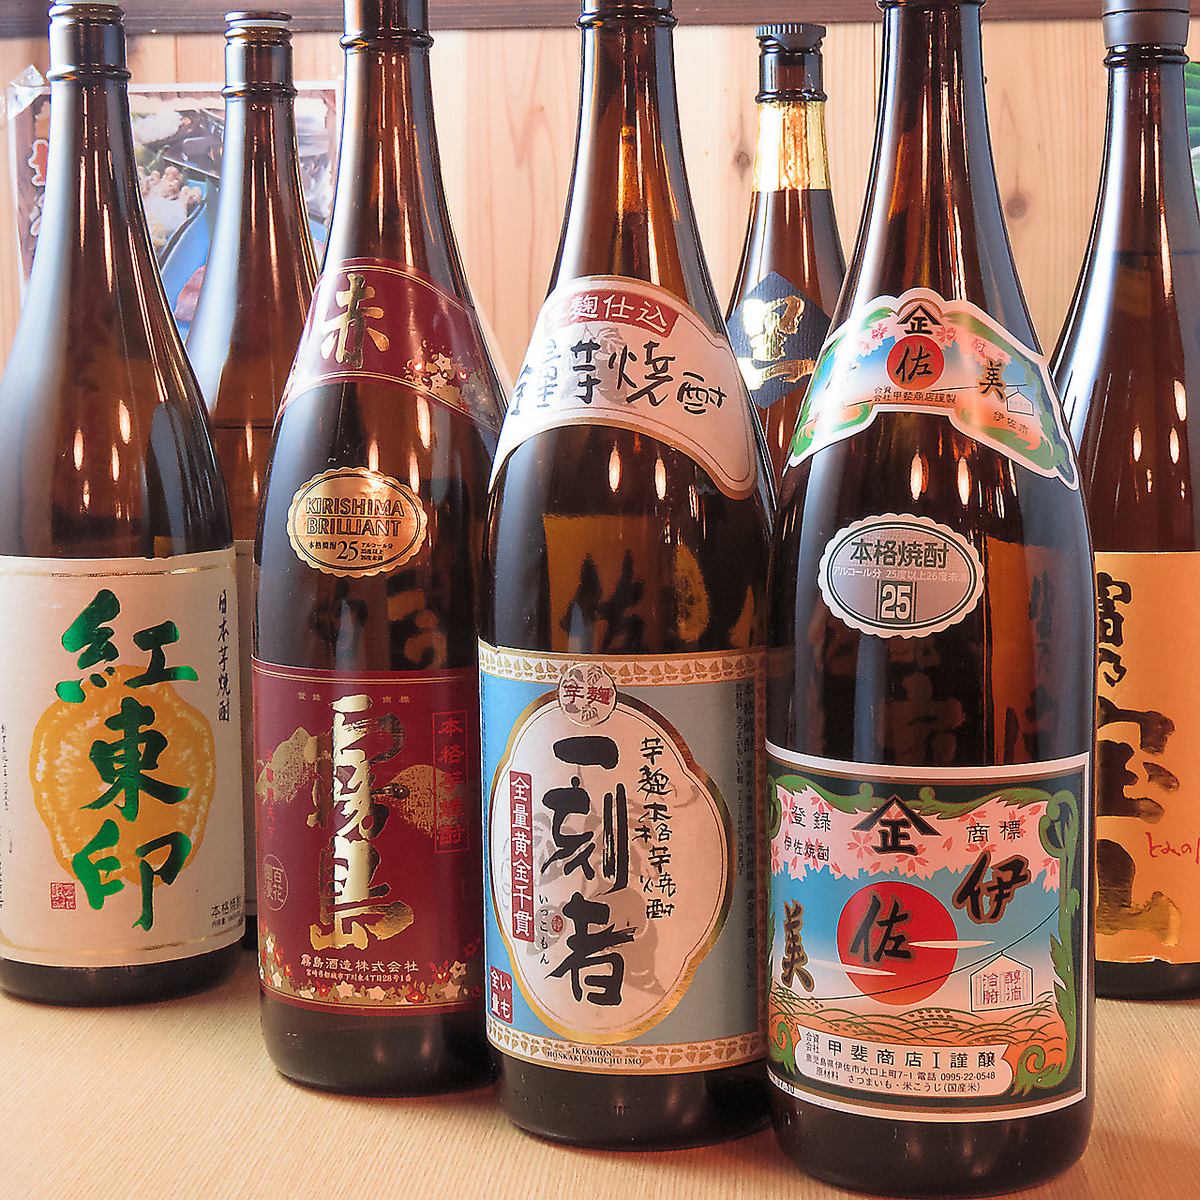 You can enjoy all drinks such as selected sake and local sake at a cost.